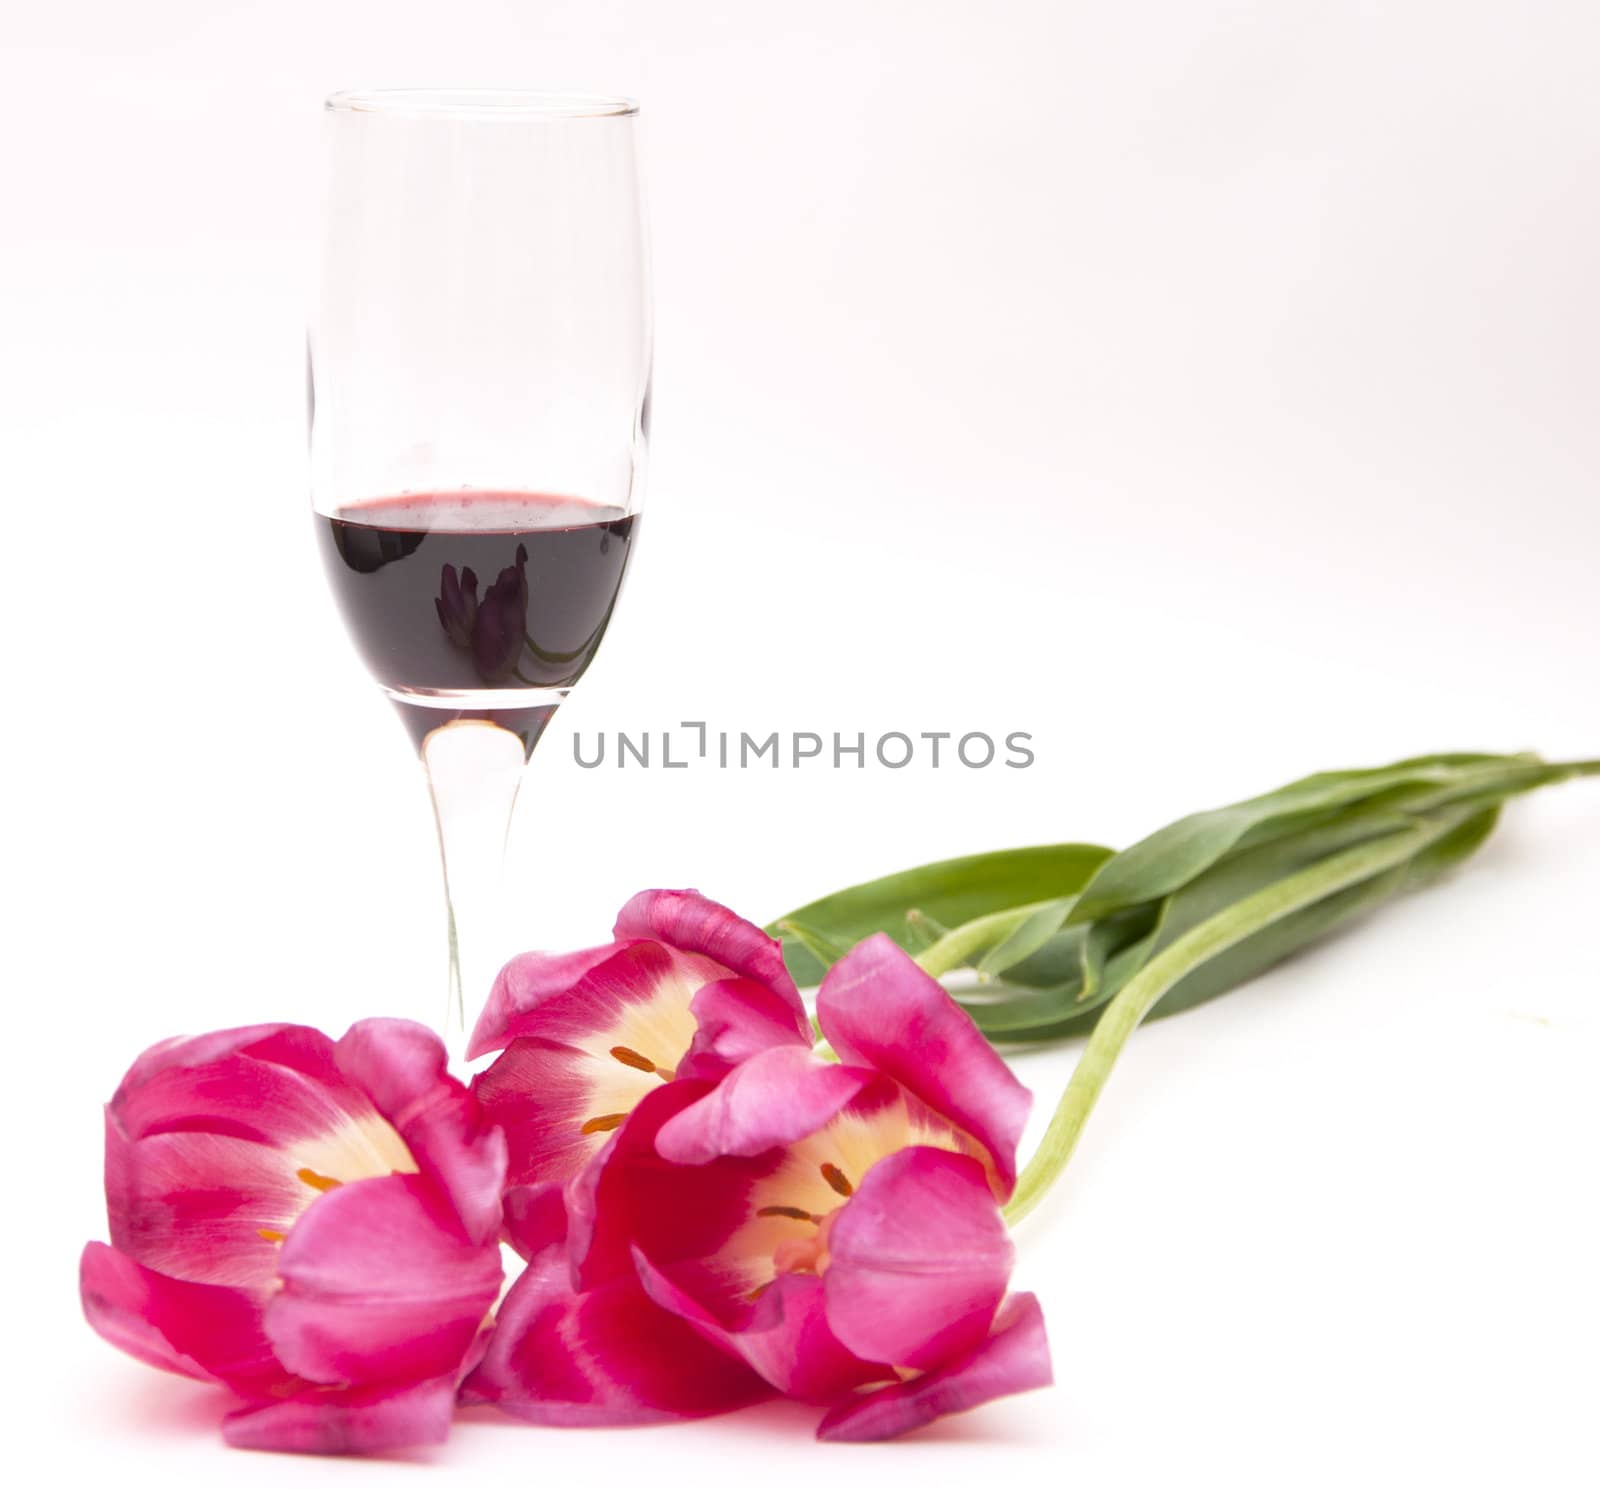 Red wine glass by inxti